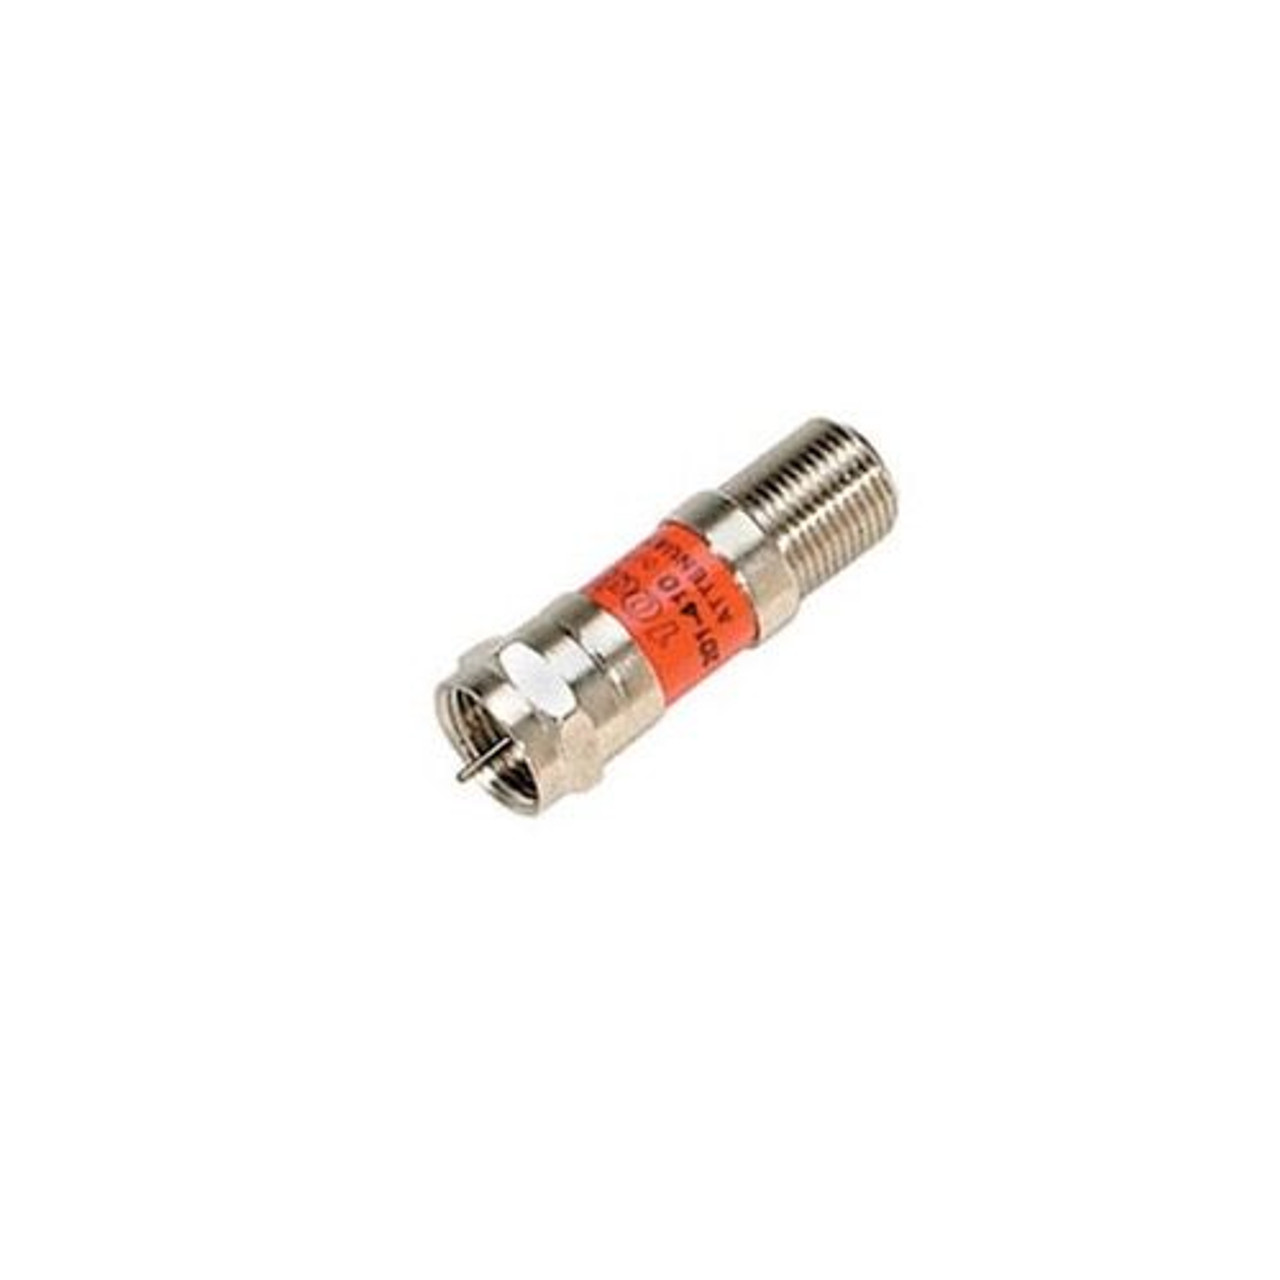 Steren 201-410 10 dB Attenuator Pad DC Block F-Type 75 Ohm Female to Male Inline Fixed 5 - 1750 MHz 22 Gauge Spring Steel Nickle Plated In-Line Coupler Connector 1 Pack